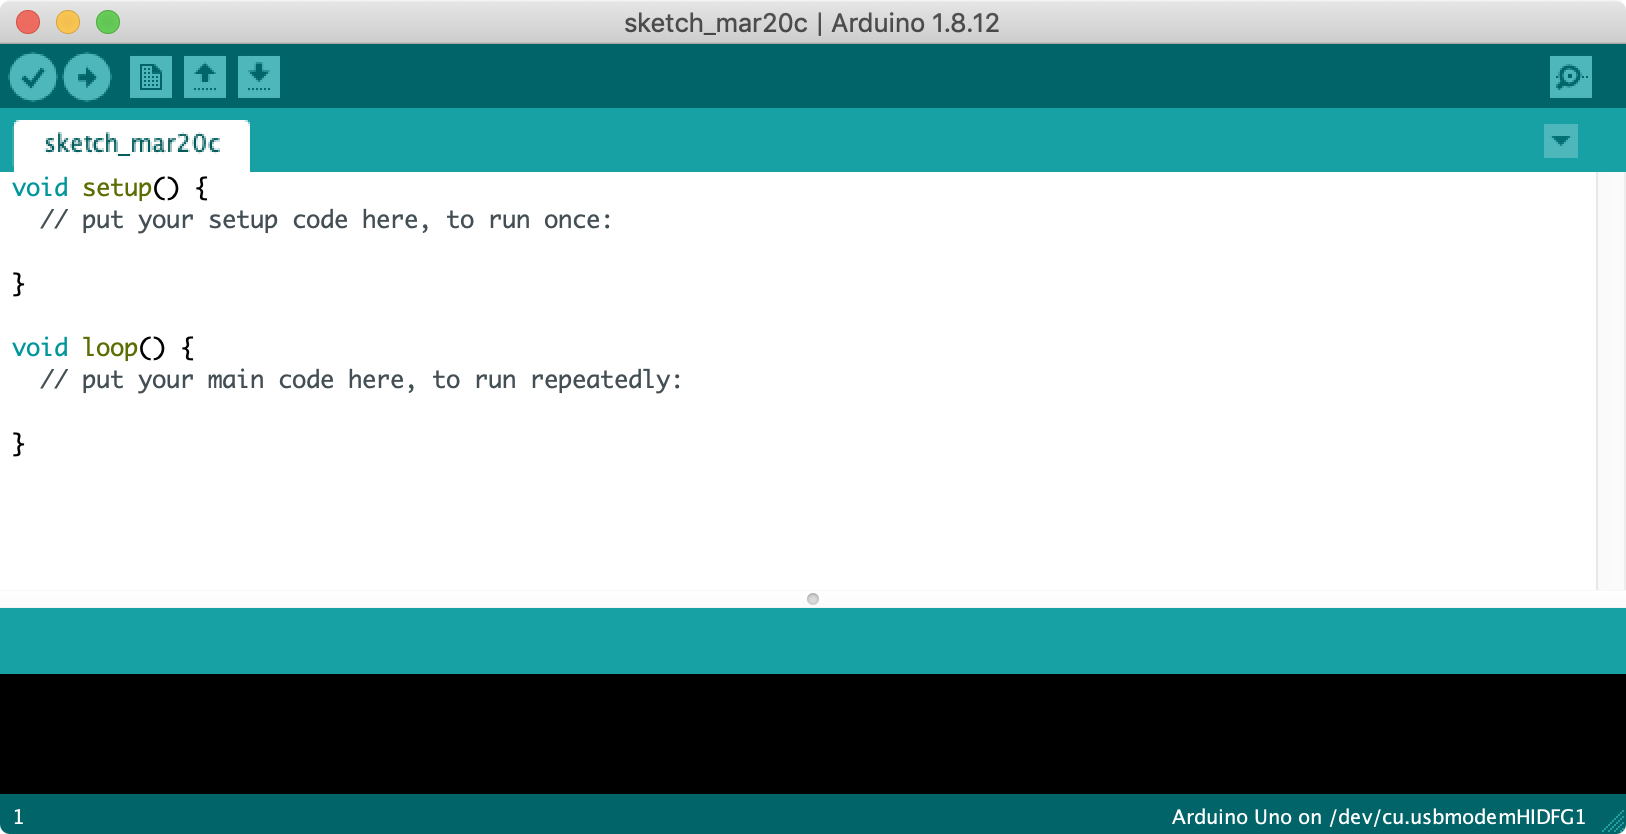 Screenshot of the Arduino IDE showing a new empty sketch